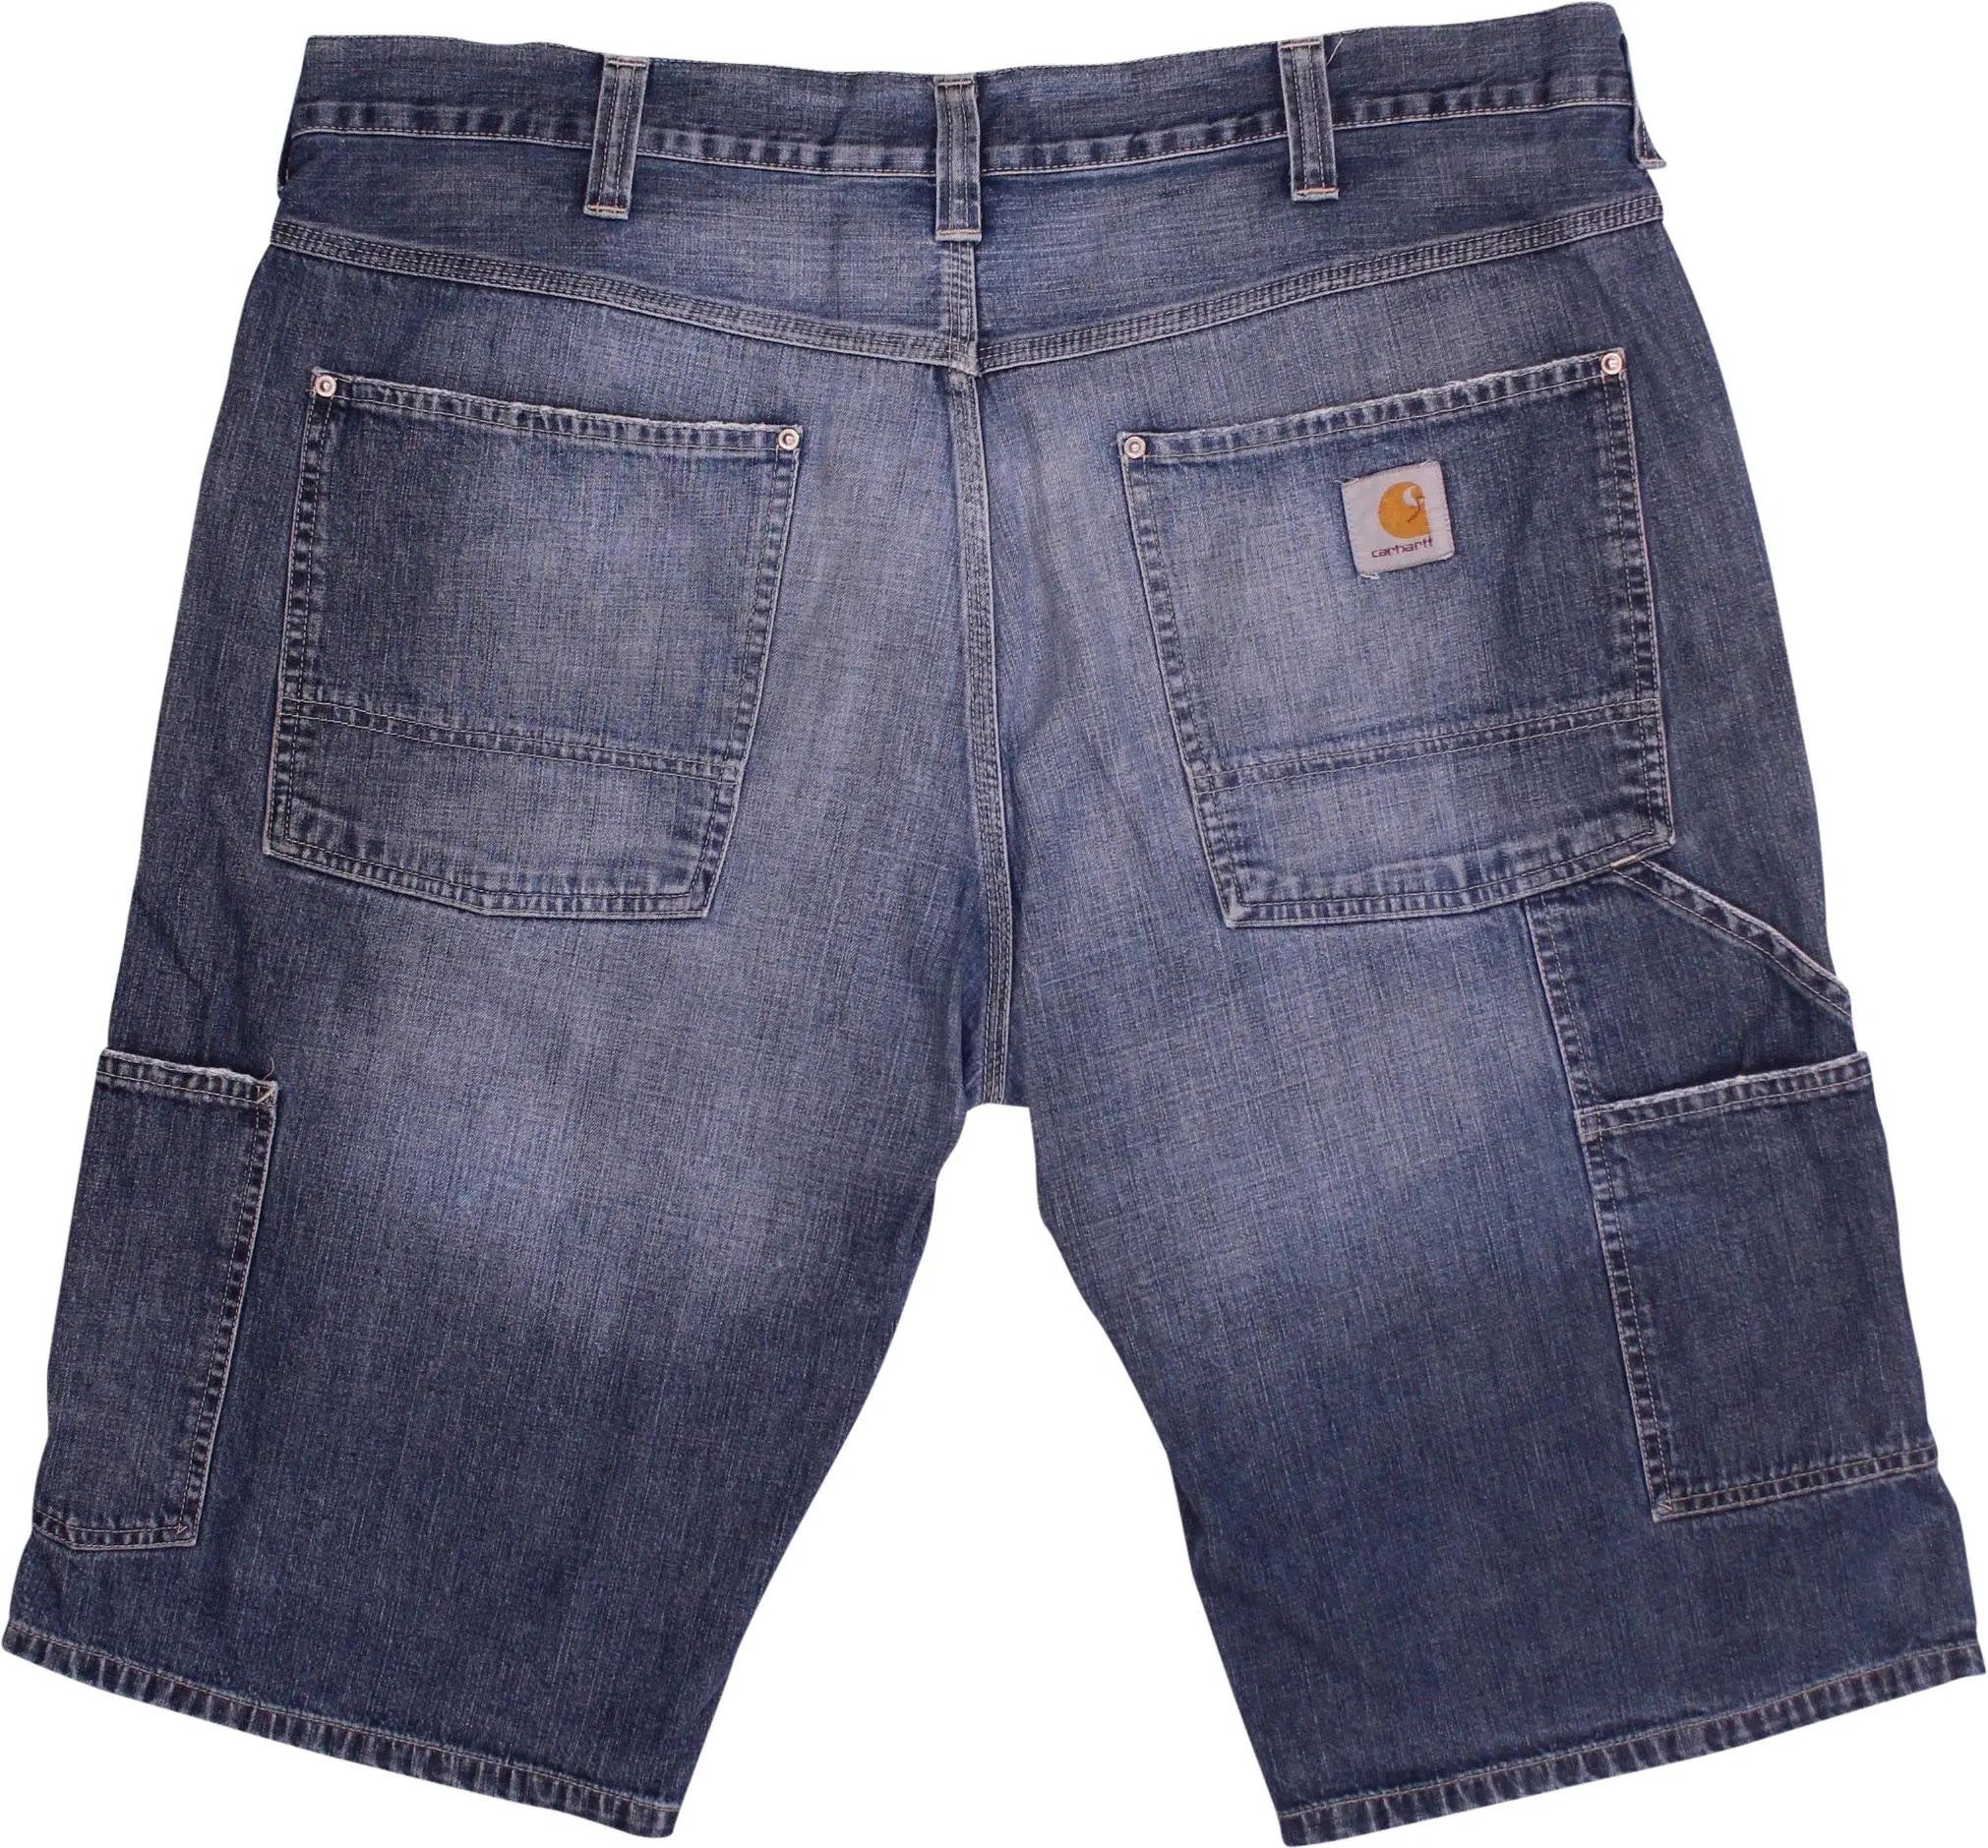 Carhartt - Blue Denim Shorts by Carhartt- ThriftTale.com - Vintage and second handclothing